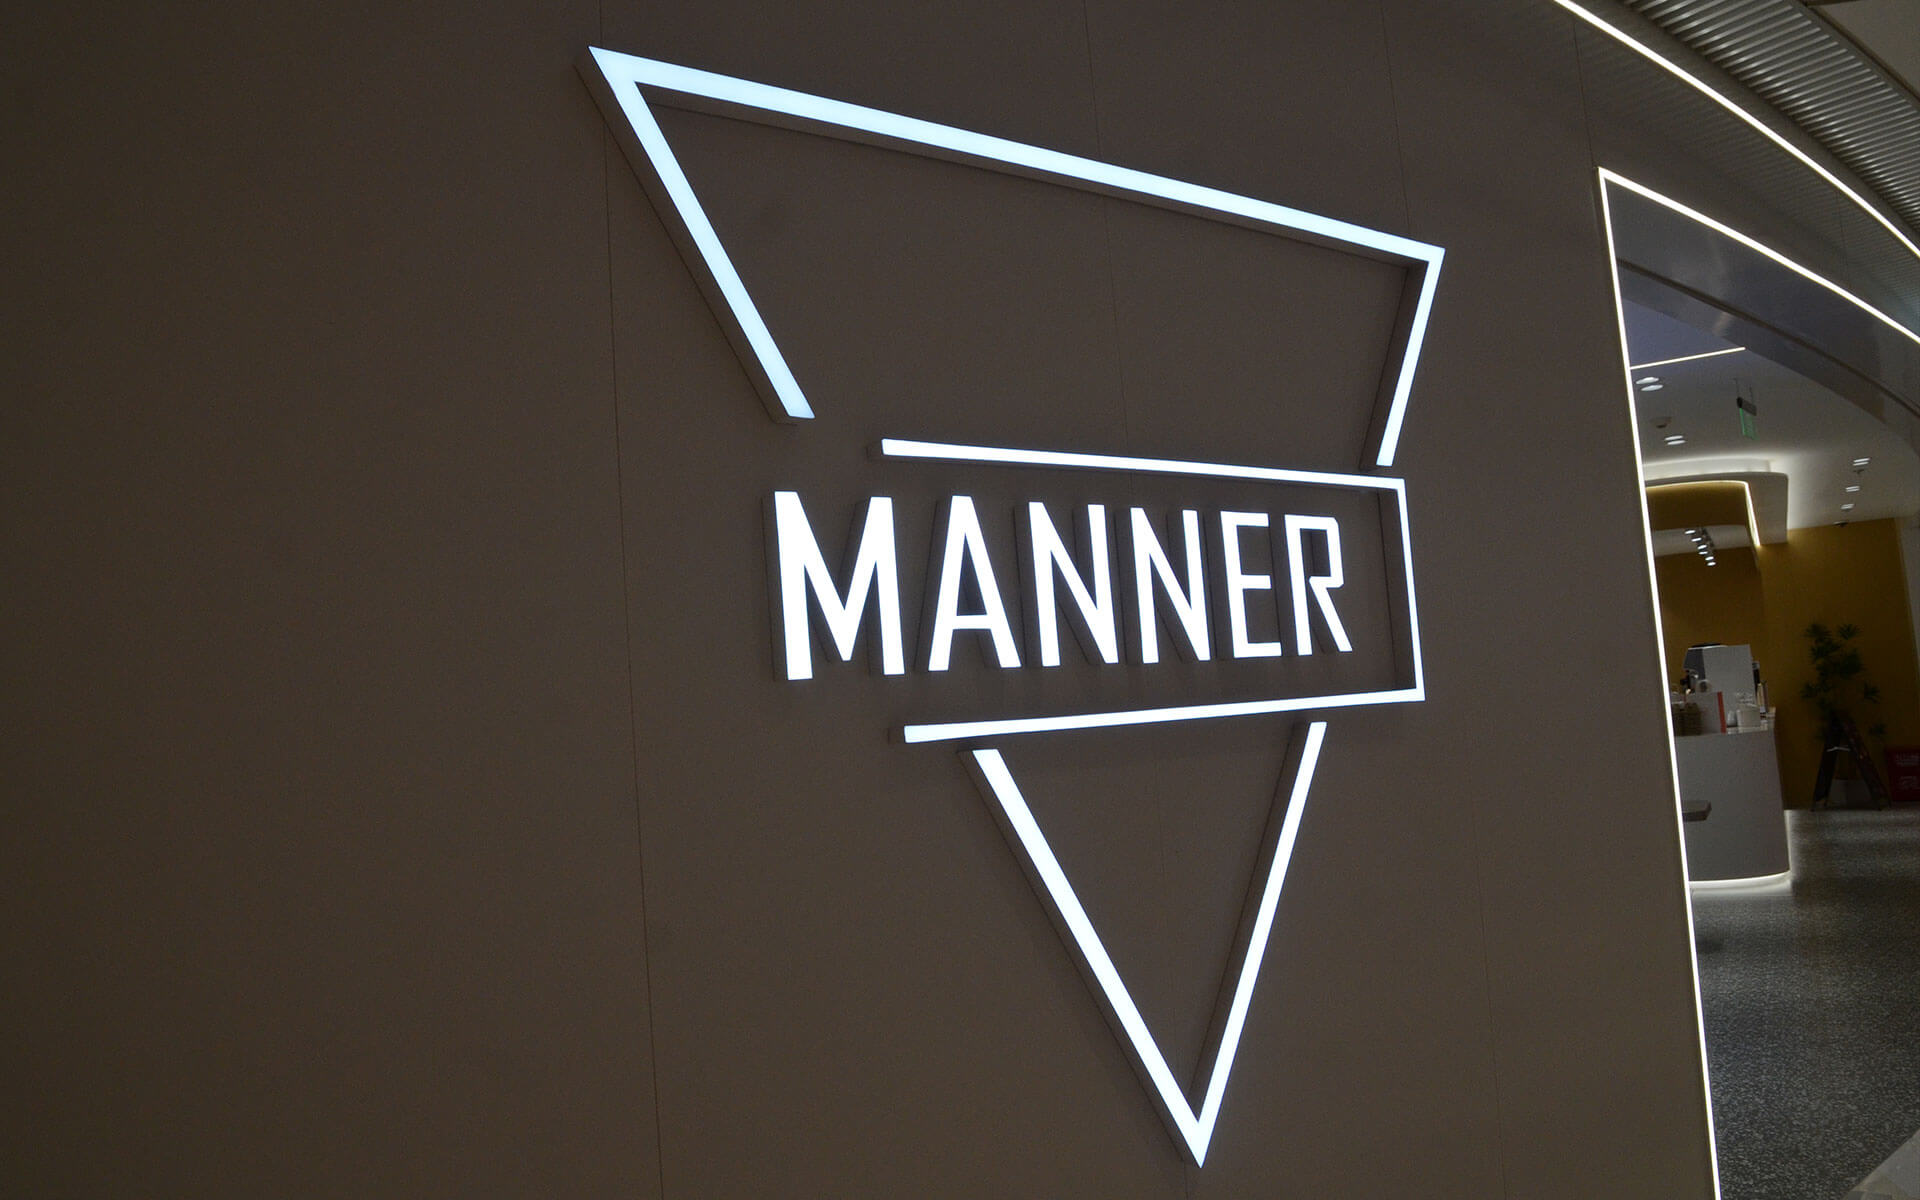 Face-lit Acrylic Channel Letters for Manner